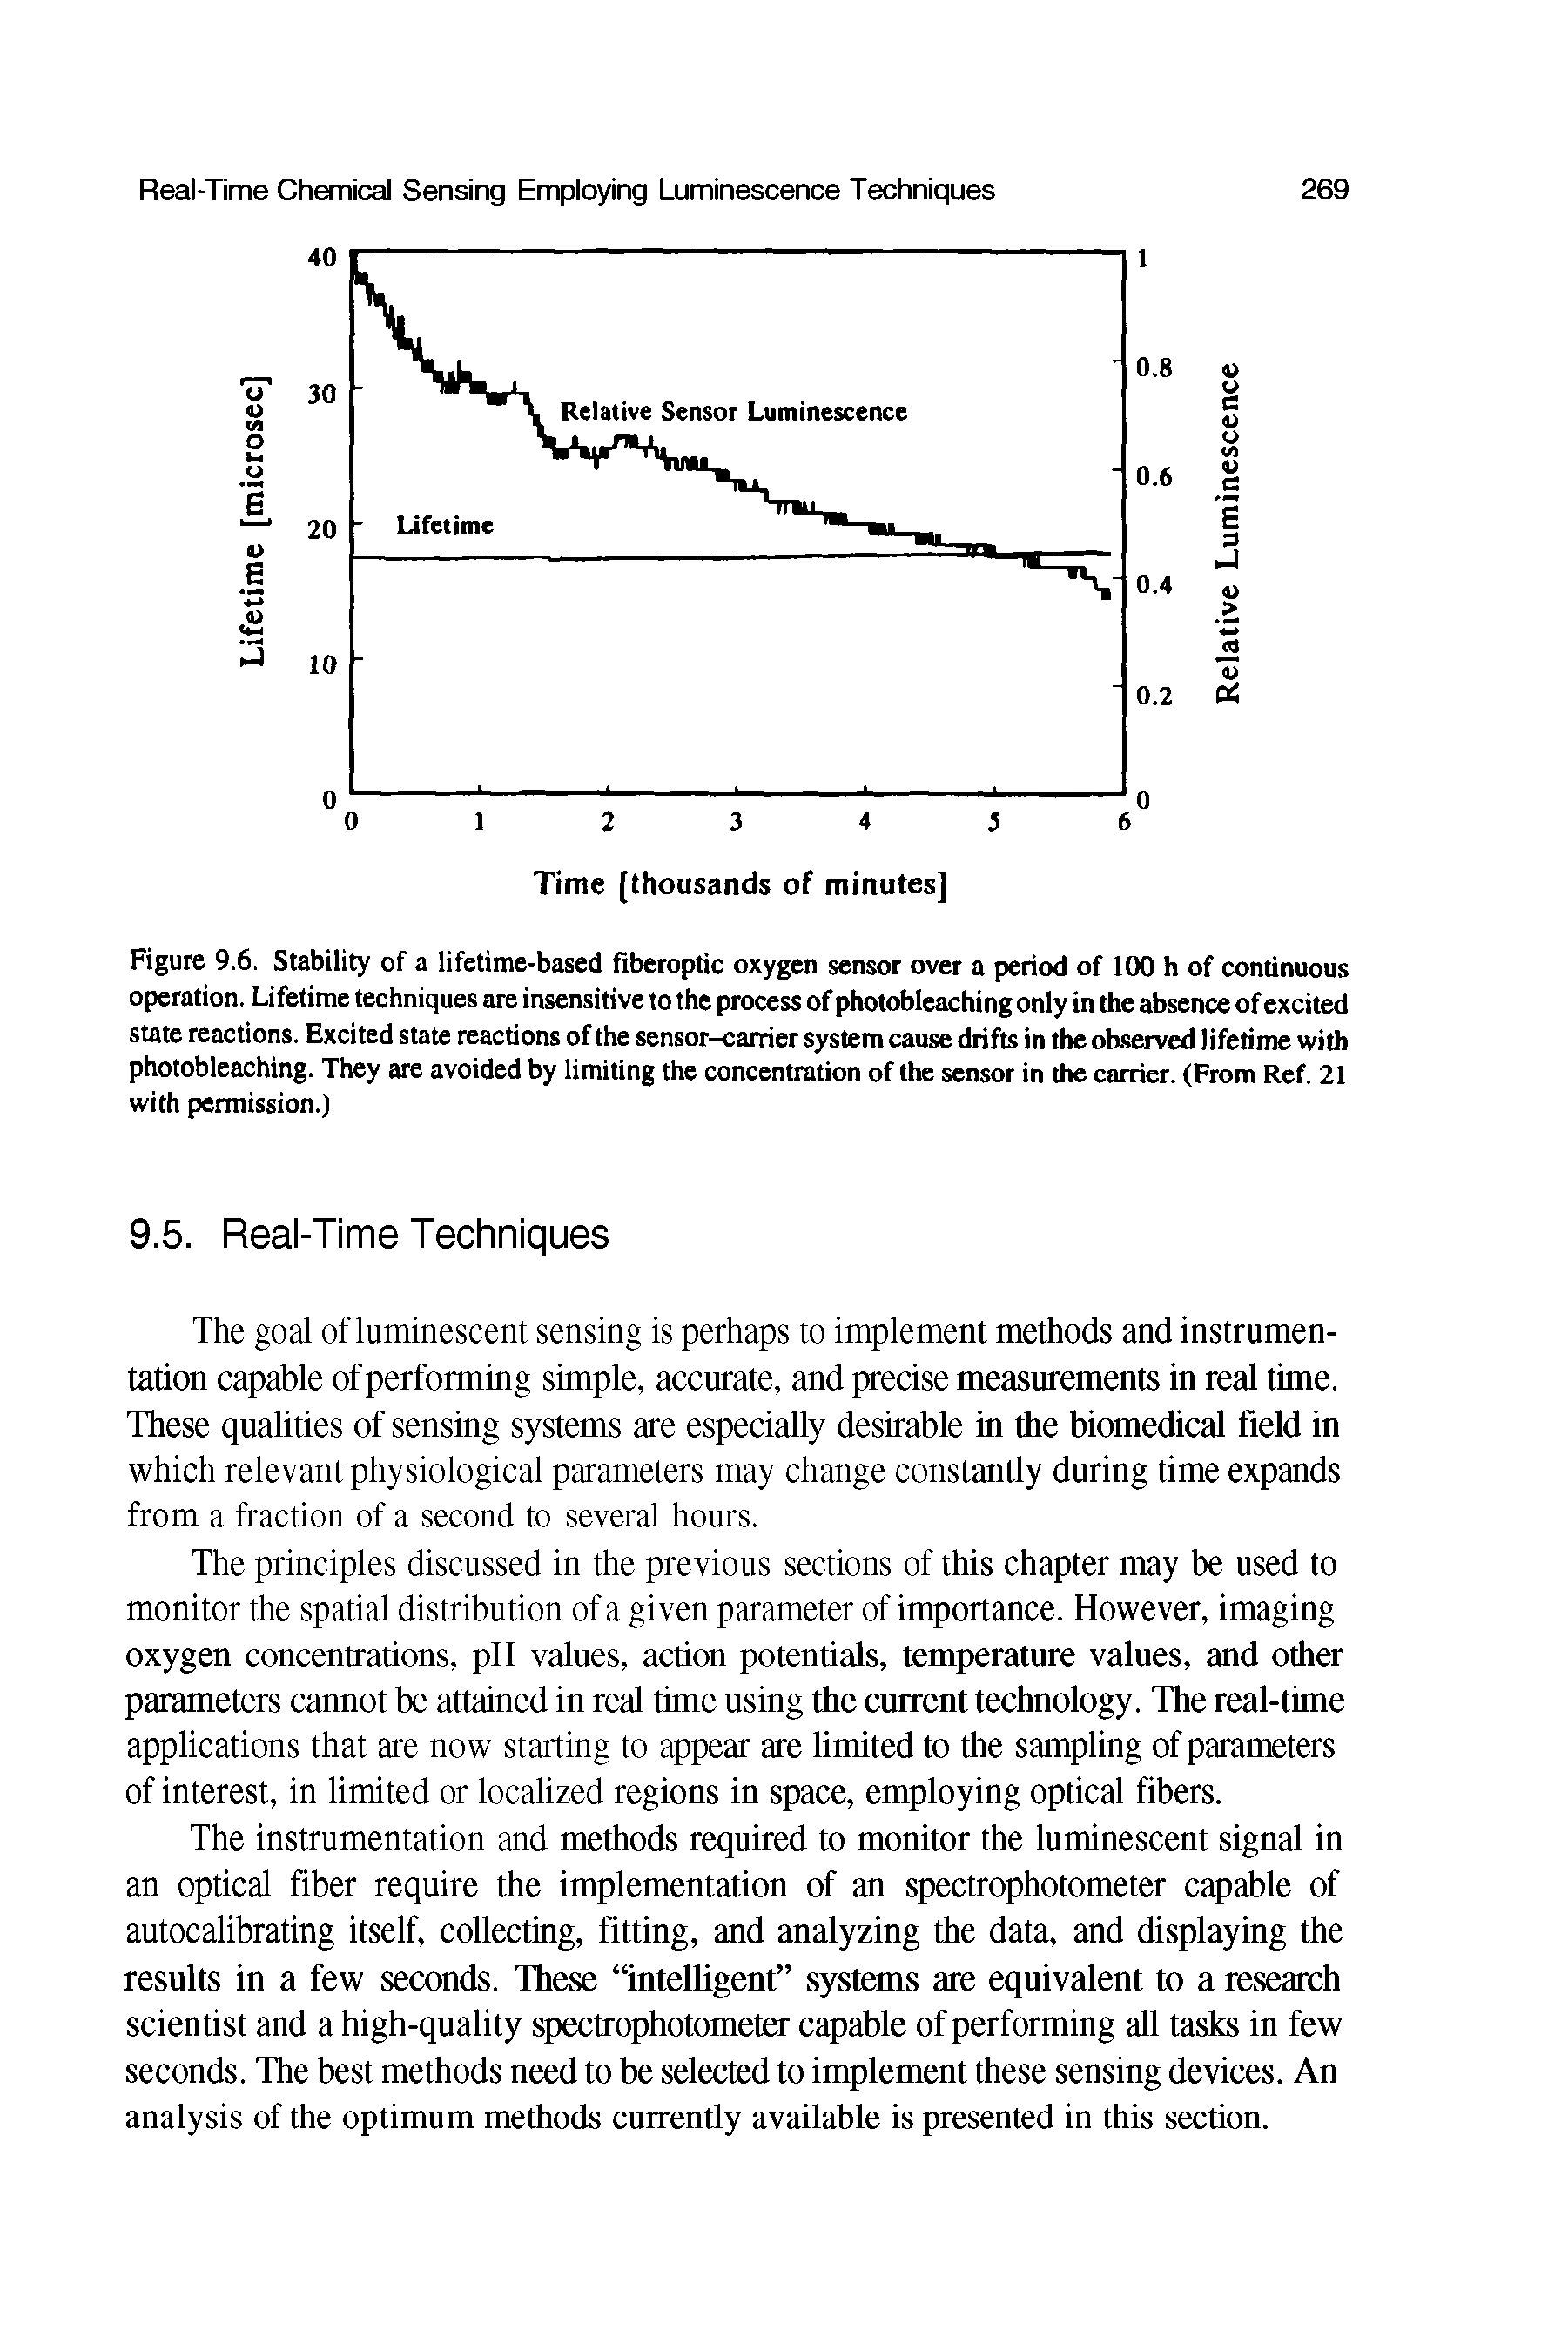 Figure 9.6. Stability of a lifetime-based fiberoptic oxygen sensor over a period of 100 h of continuous operation. Lifetime techniques are insensitive to the process of photobleaching only in the absence of excited state reactions. Excited state reactions of the sensor-carrier system cause drifts in the observed lifetime with photobleaching. They are avoided by limiting the concentration of the sensor in the carrier. (From Ref. 21 with permission.)...